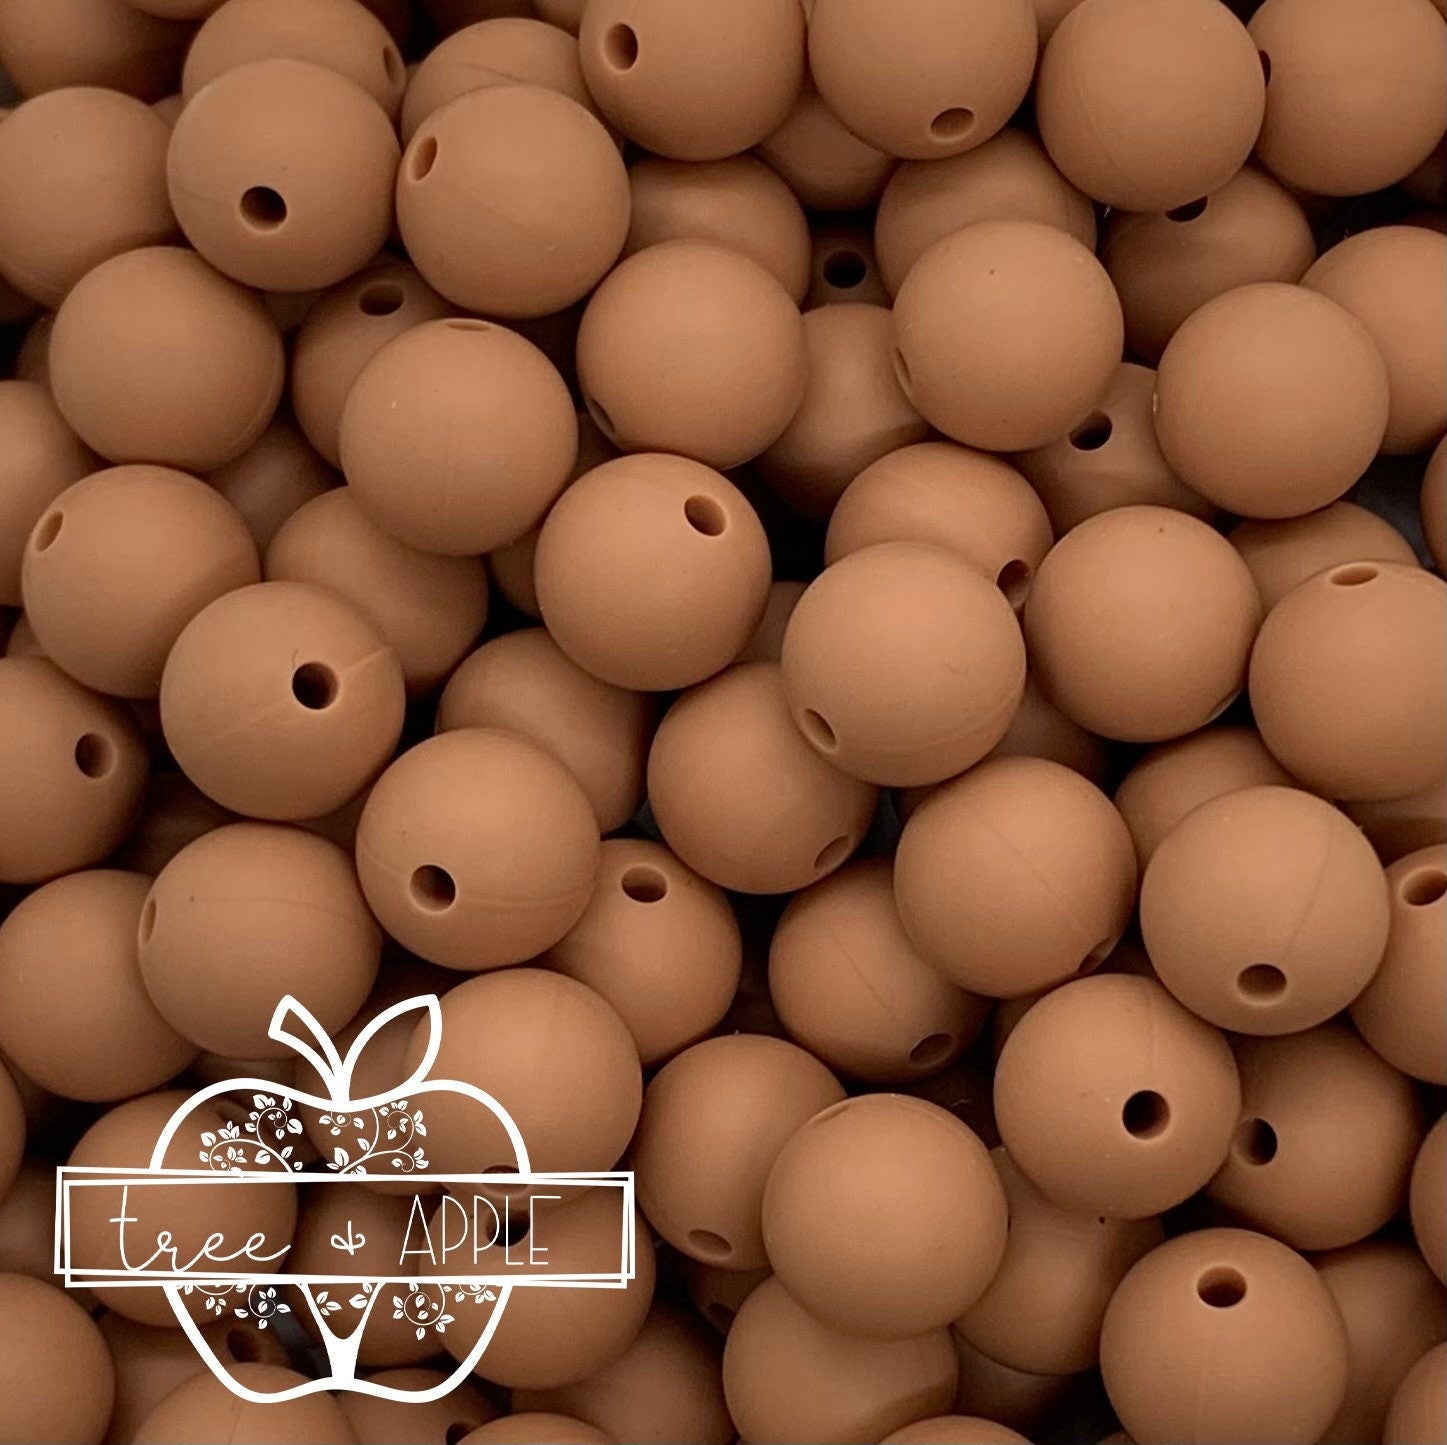 15mm Caramel Silicone Beads, Brown Round Silicone Beads, Beads Wholesale